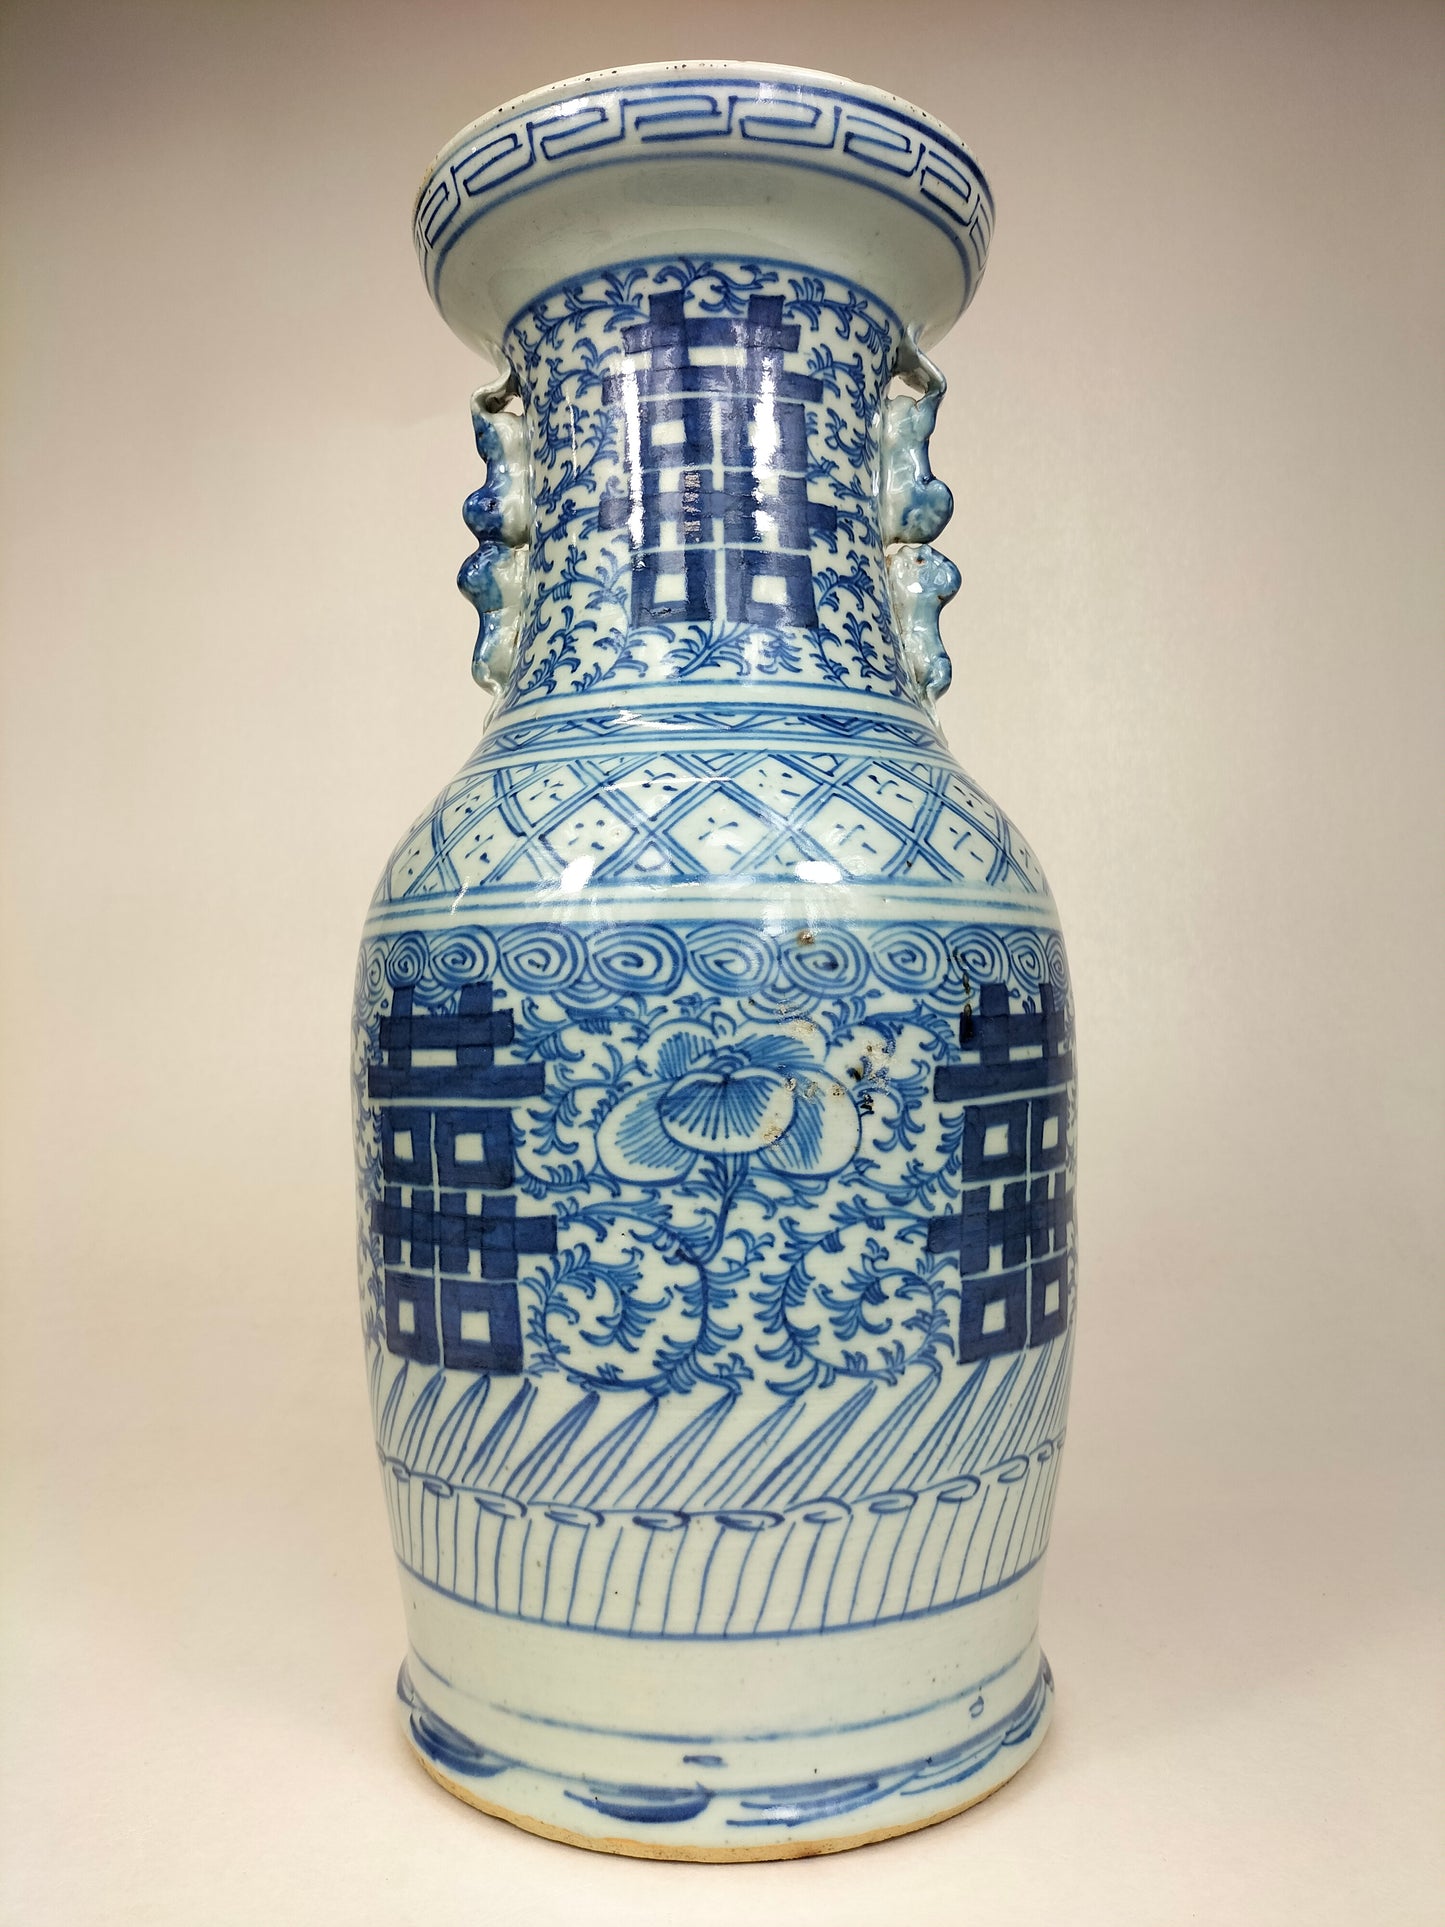 Antique Chinese double happiness wedding vase / Qing Dynasty - 19th century